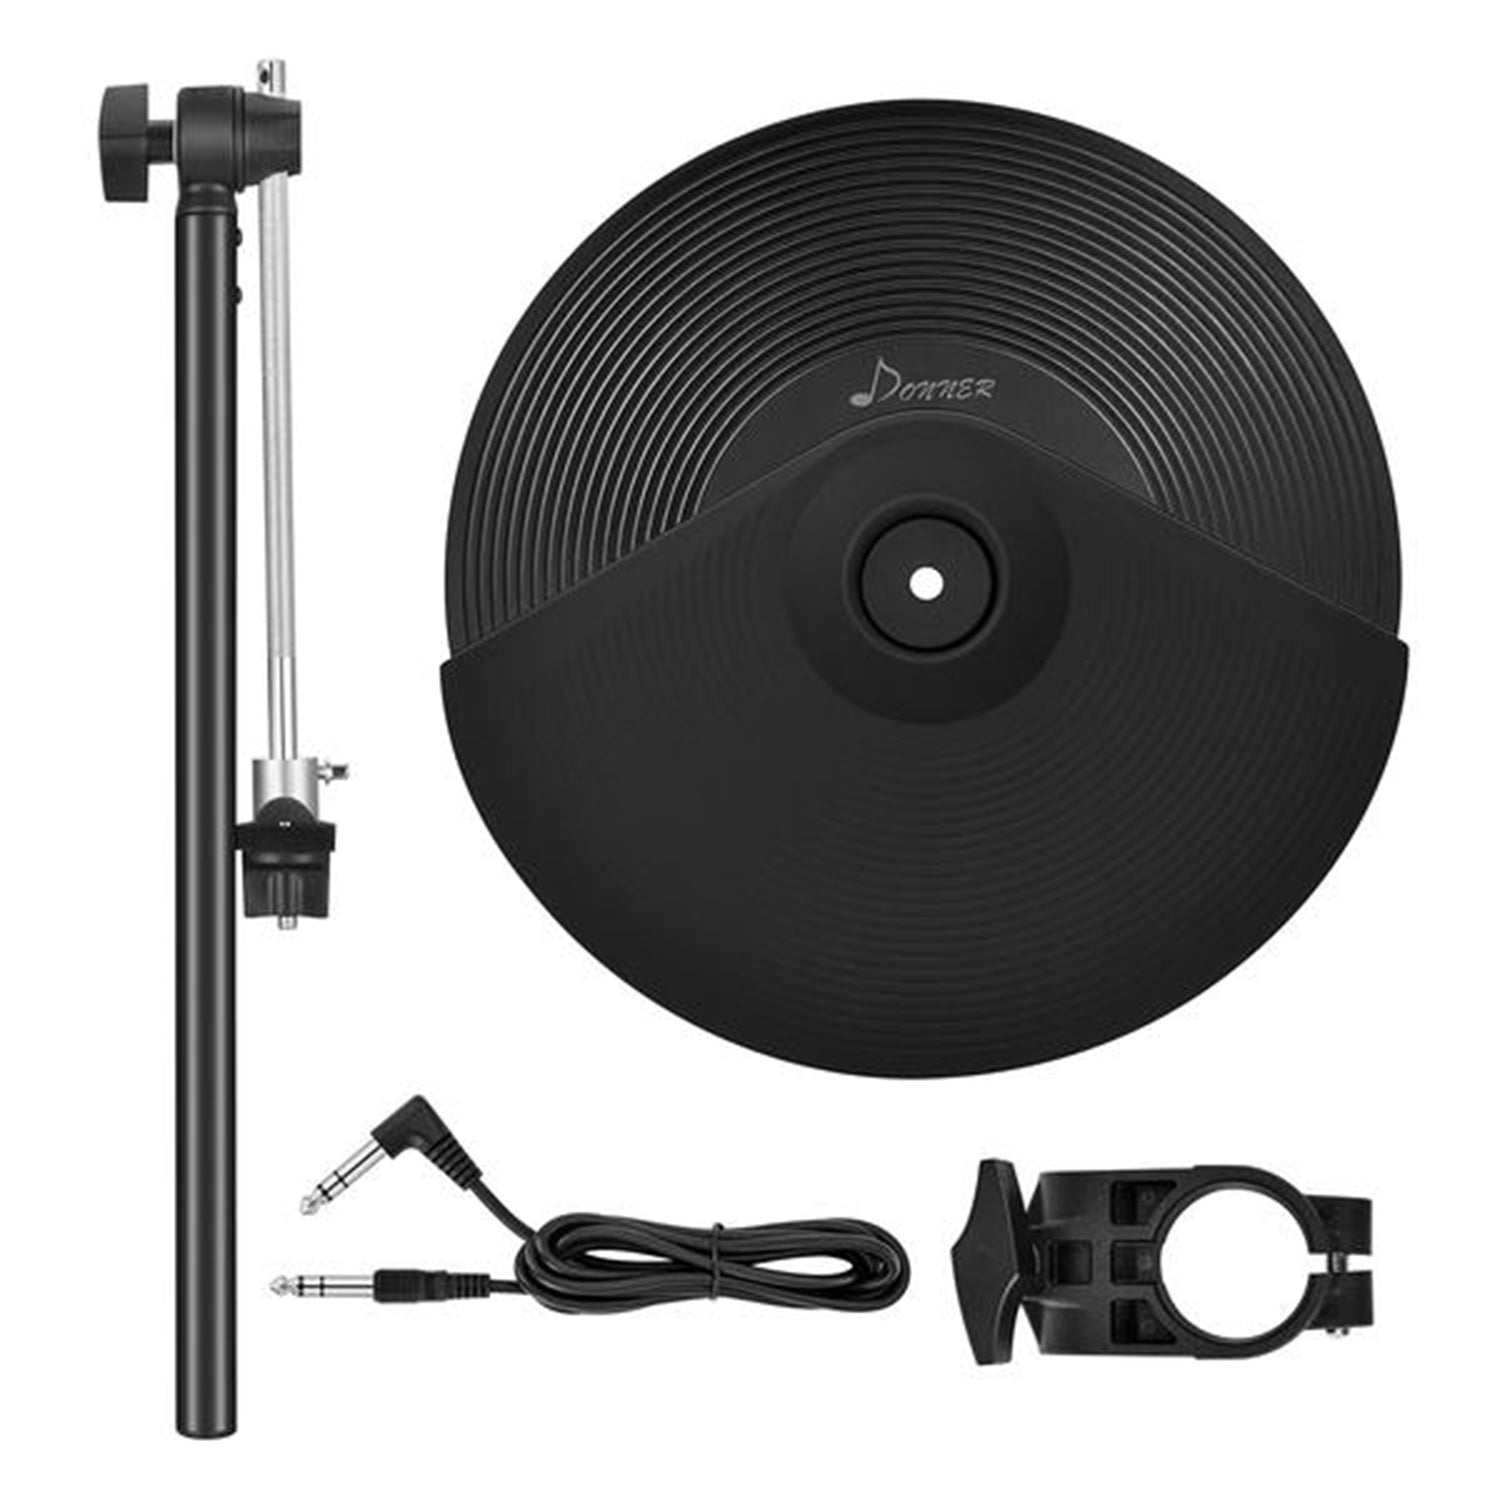 

Donner DED-200CY Expansion Cymbal Kit with 12in Cymbal/Rack Clamp/Auido Cable for DED-200/300/400